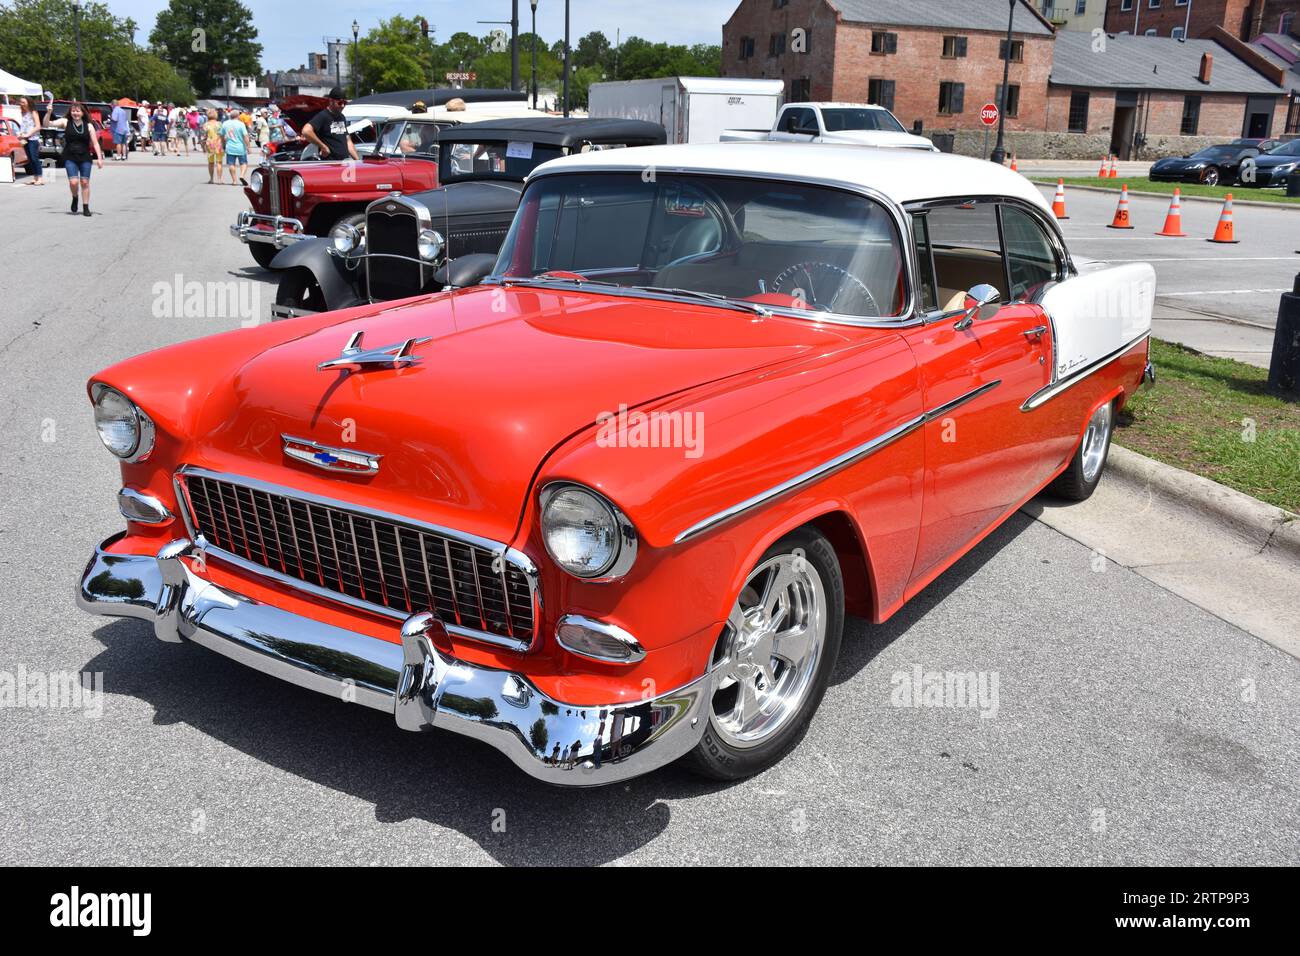 A1955 Chevrolet Bel Air Hard Top on display at a car show. Stock Photo